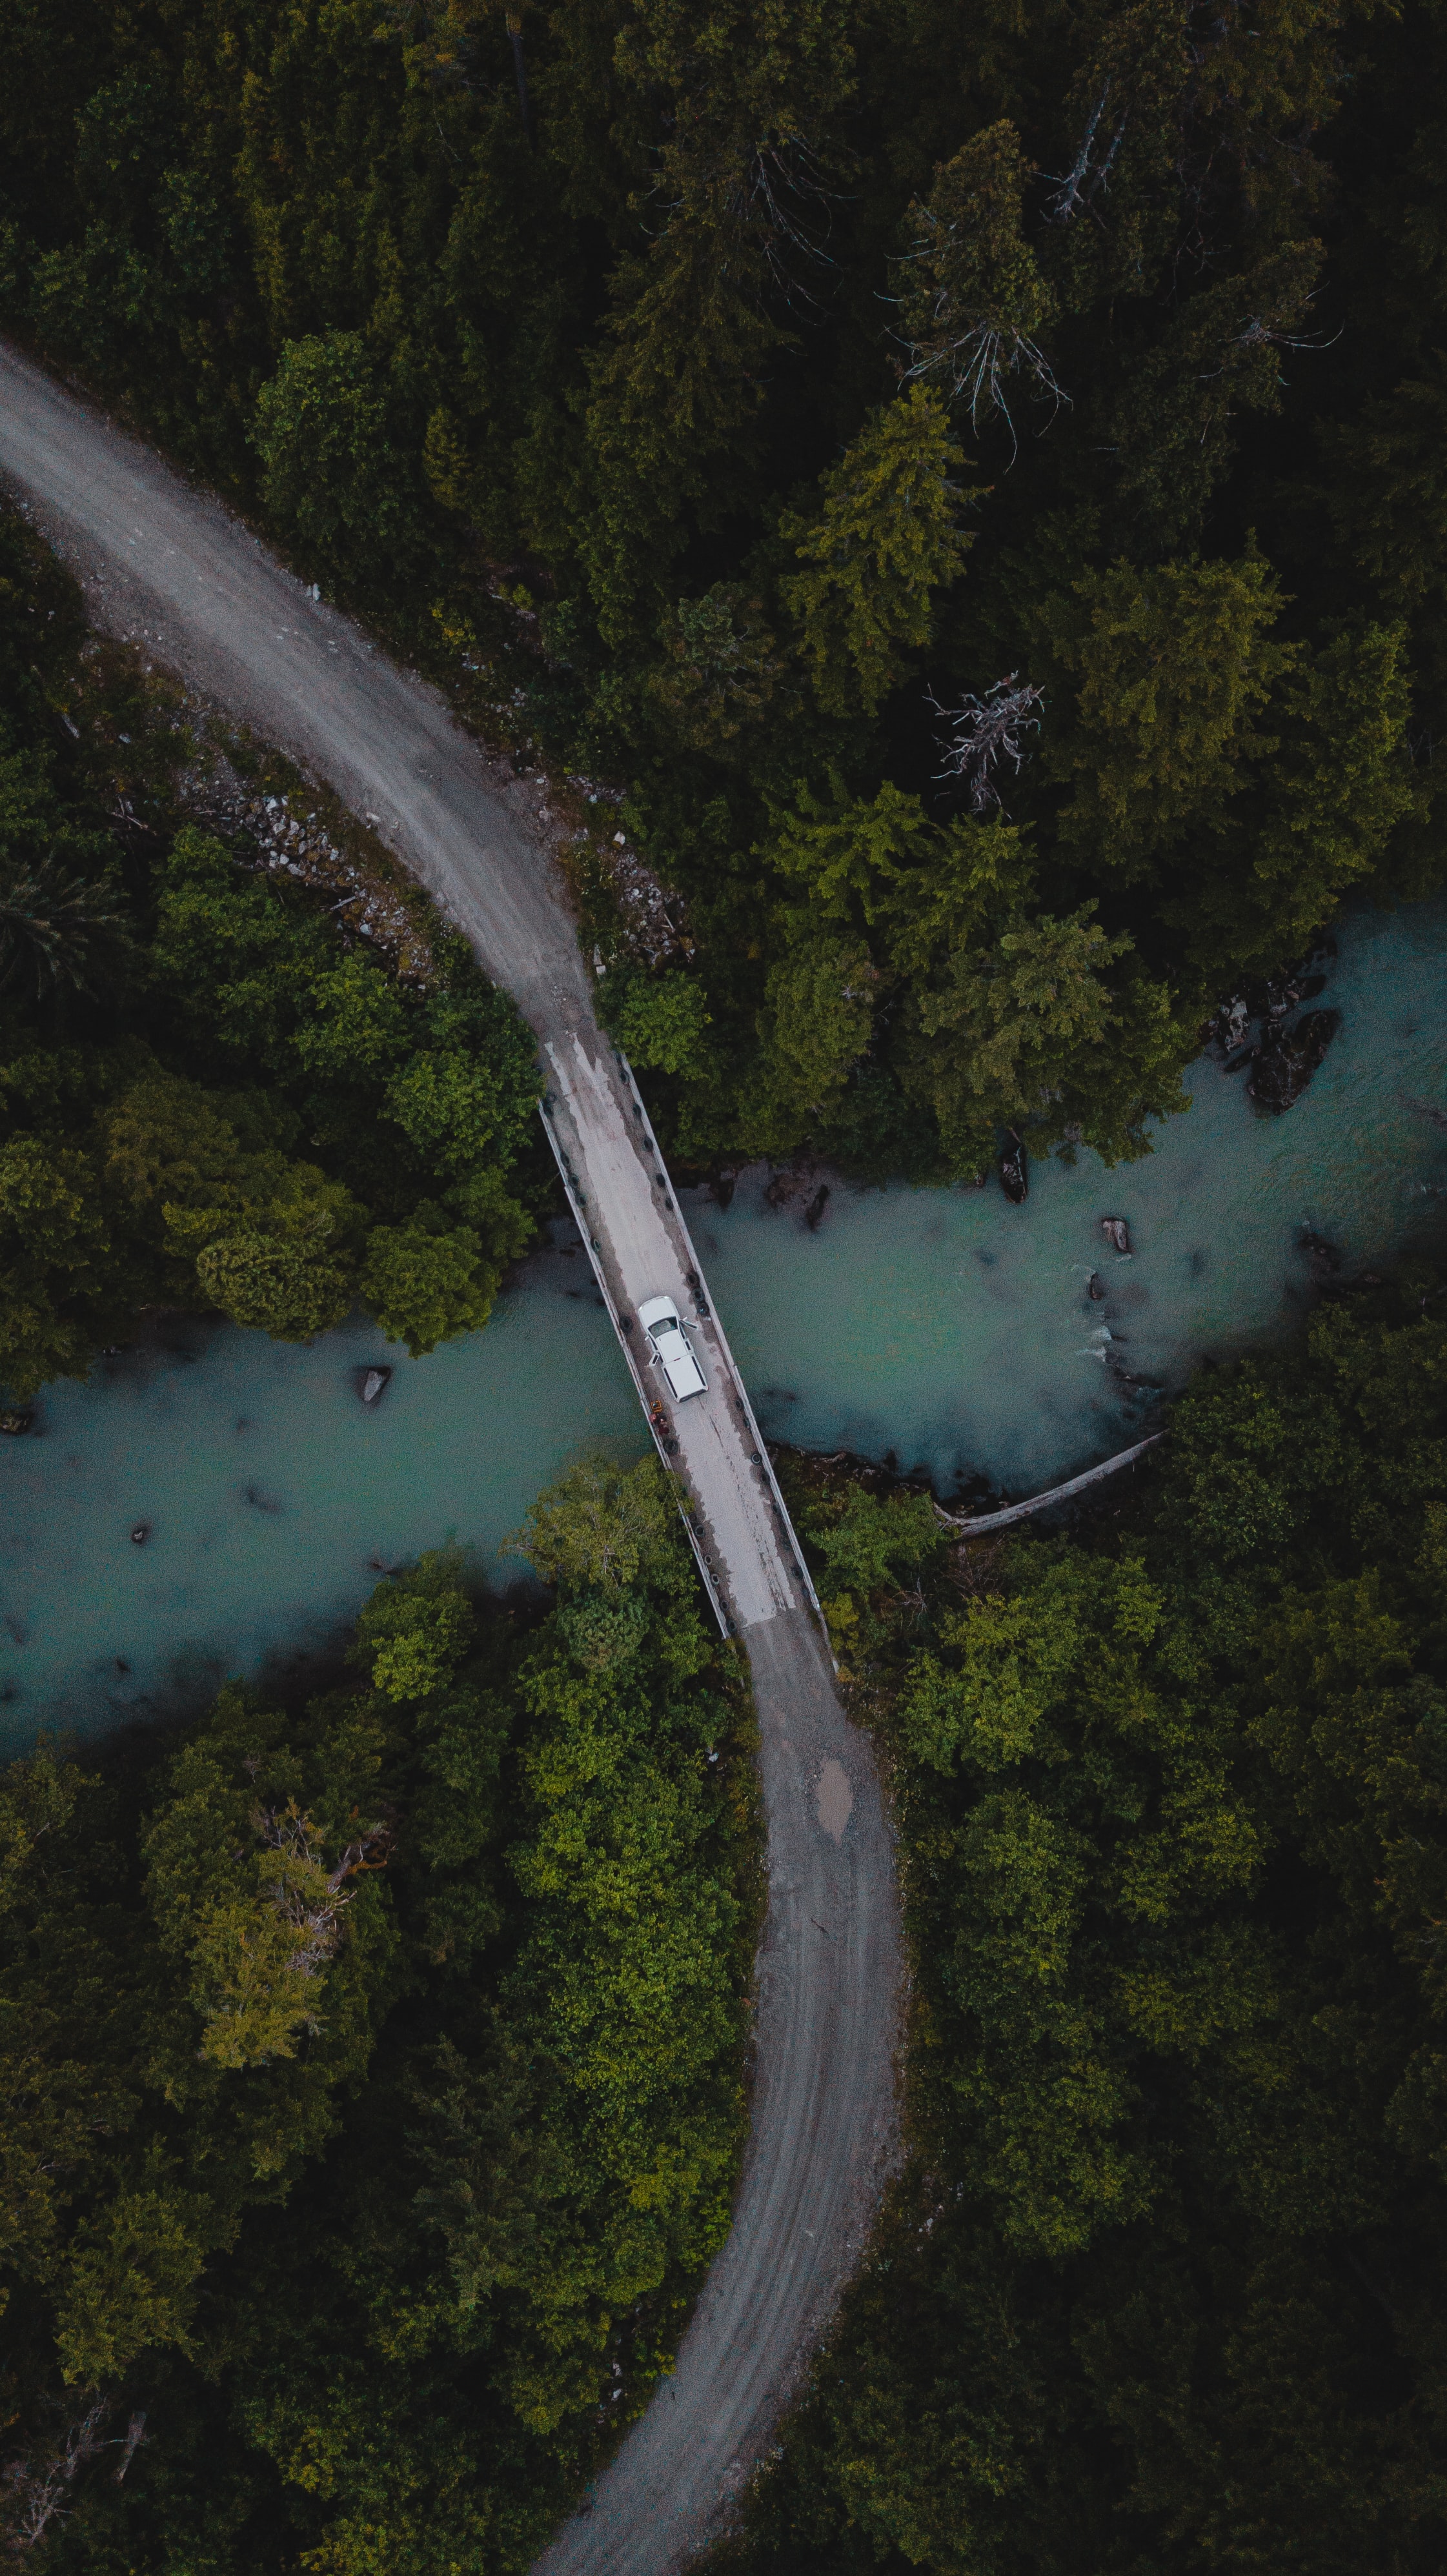 rivers, nature, trees, view from above, forest, car, machine, bridge FHD, 4K, UHD